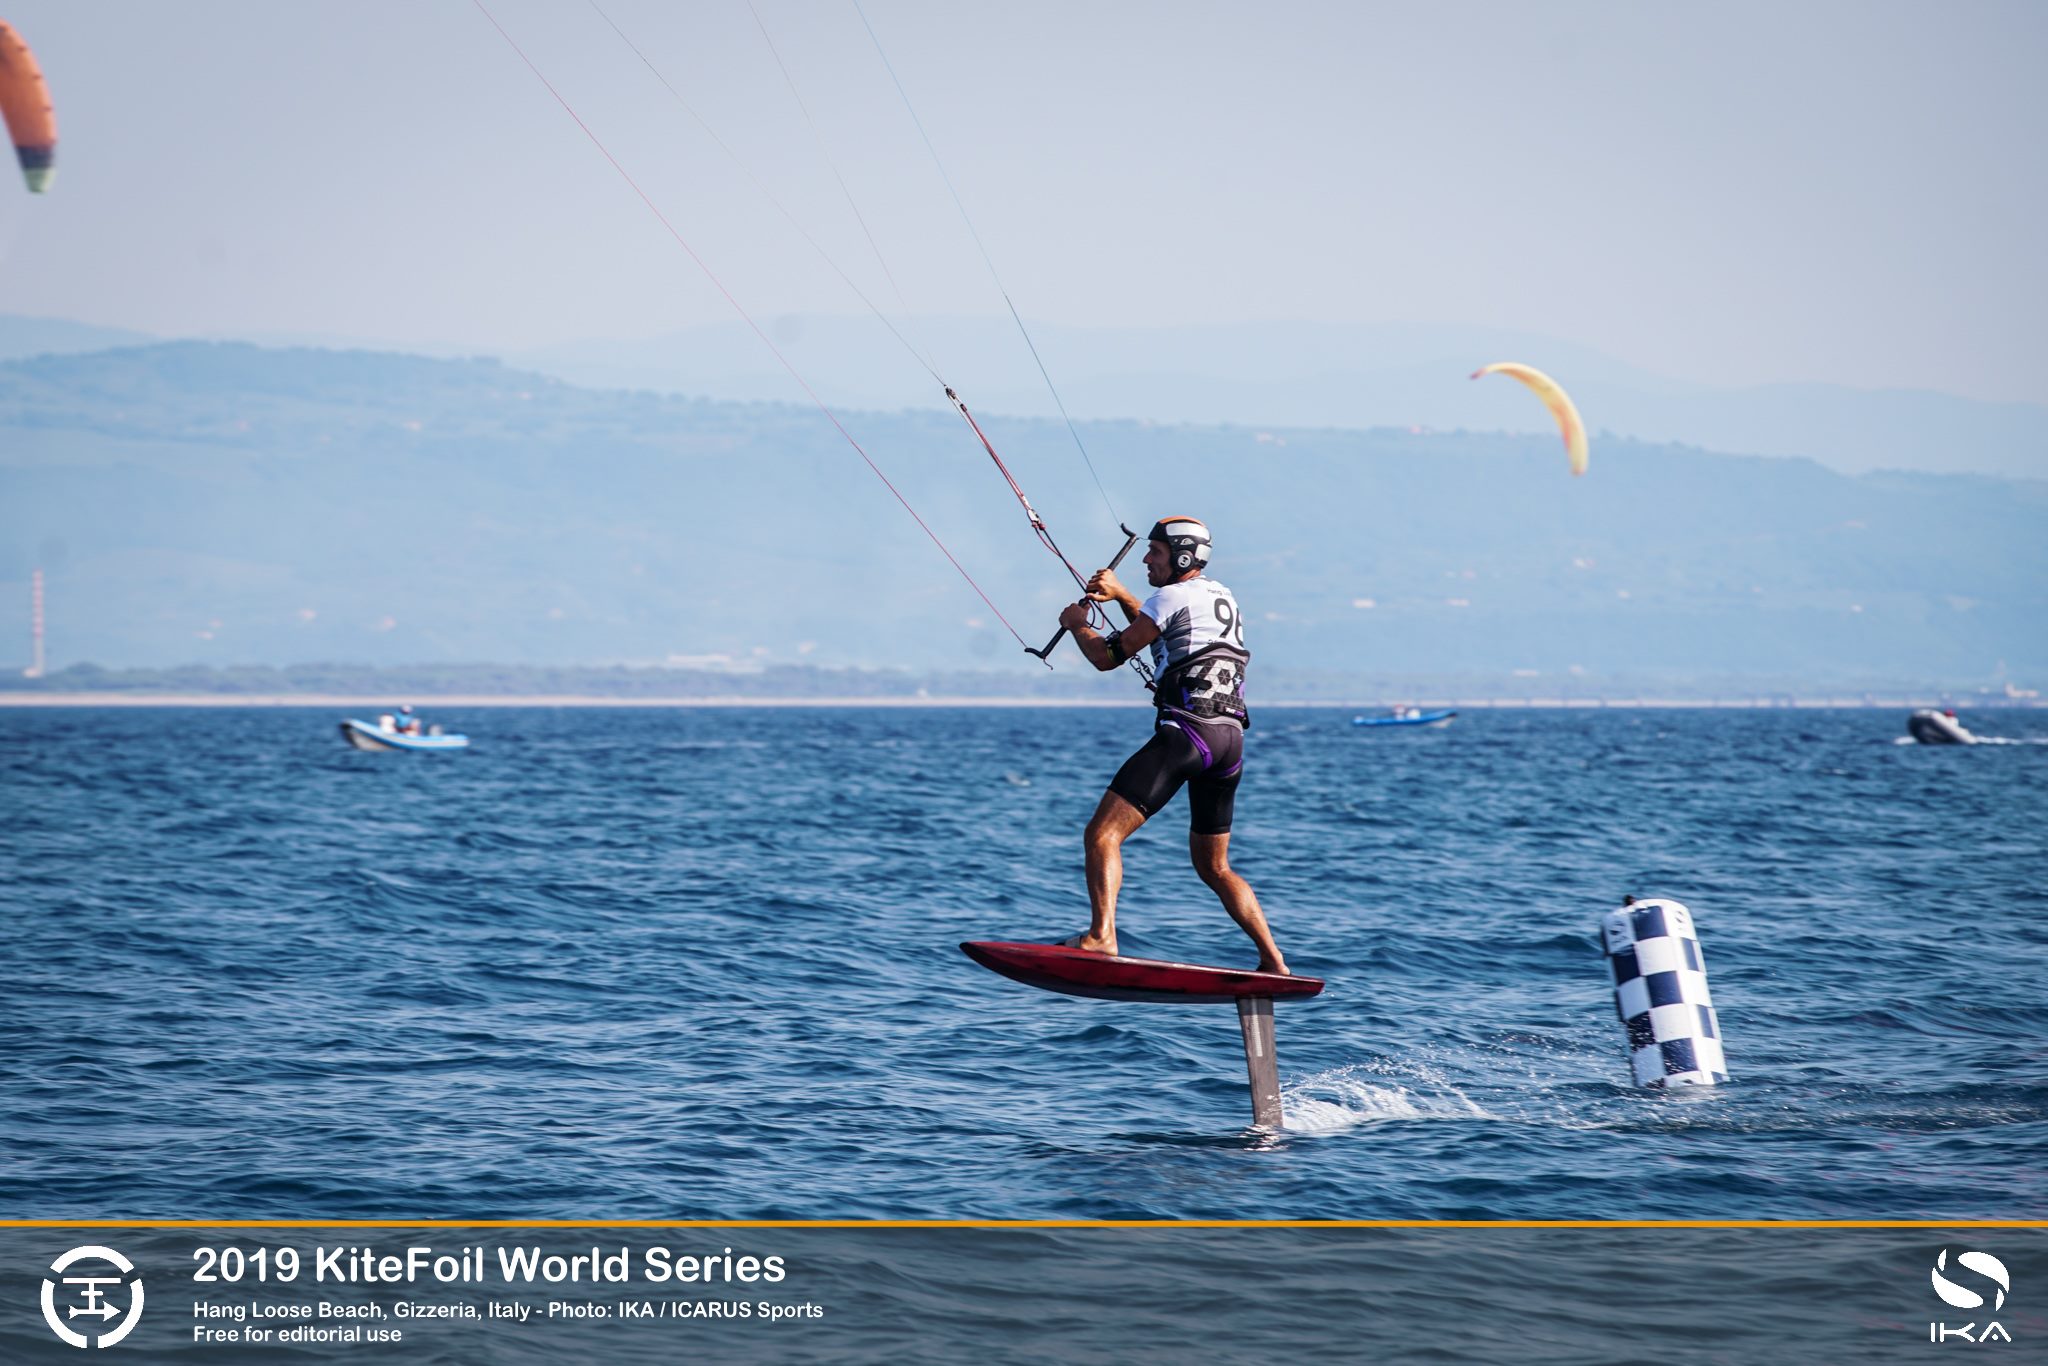  KiteFoil  GoldCup  Gizzeria ITA  Final results, the young guns Toni Vodisek SLO (19) and Daniela Moroz USA (18) ruled the show